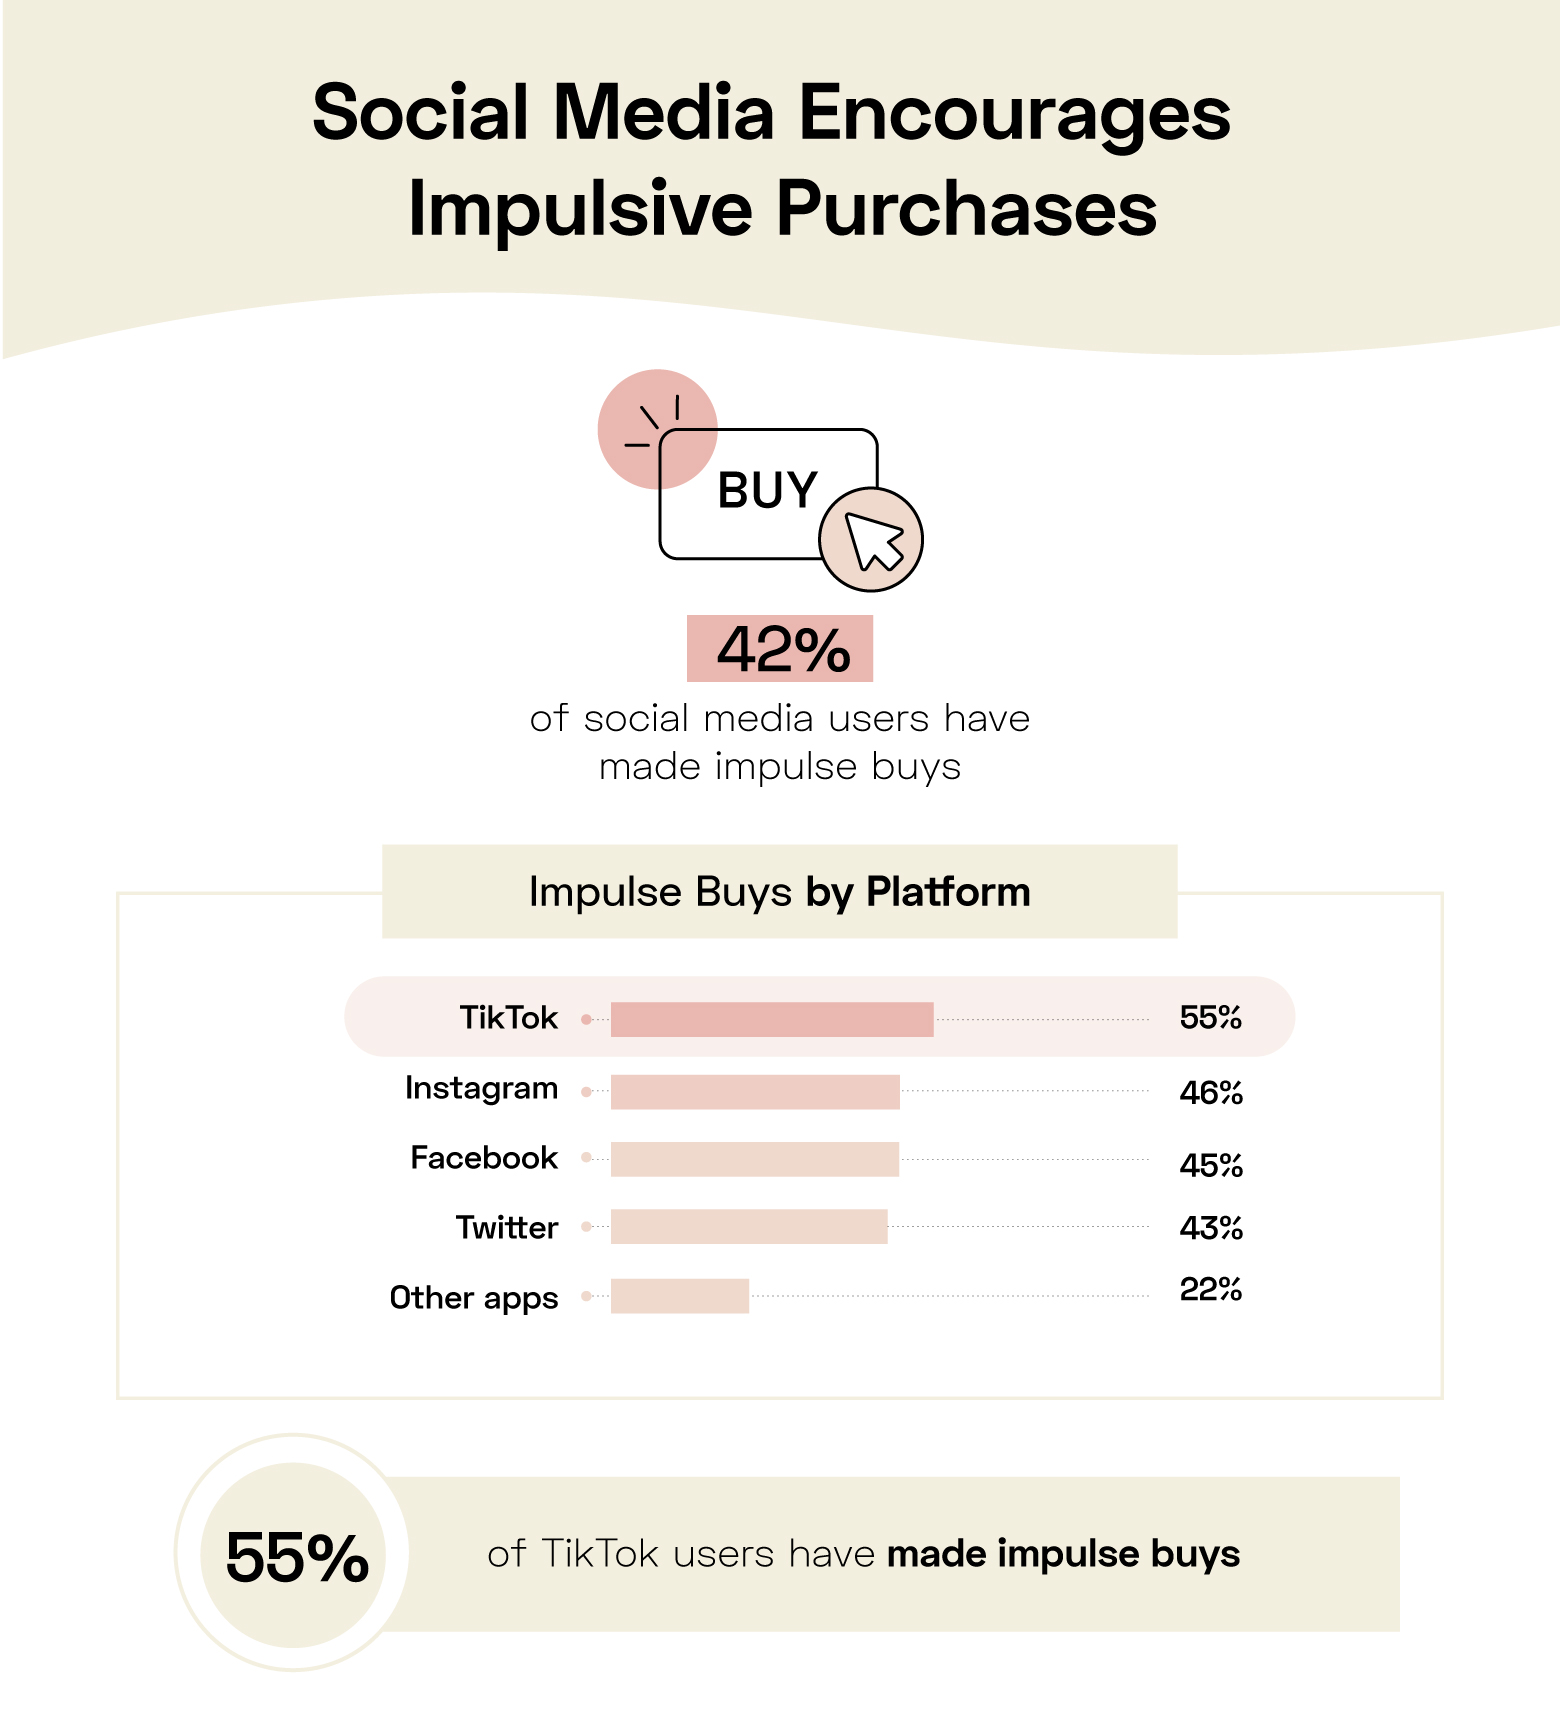 social media causes users to make impulse purchases